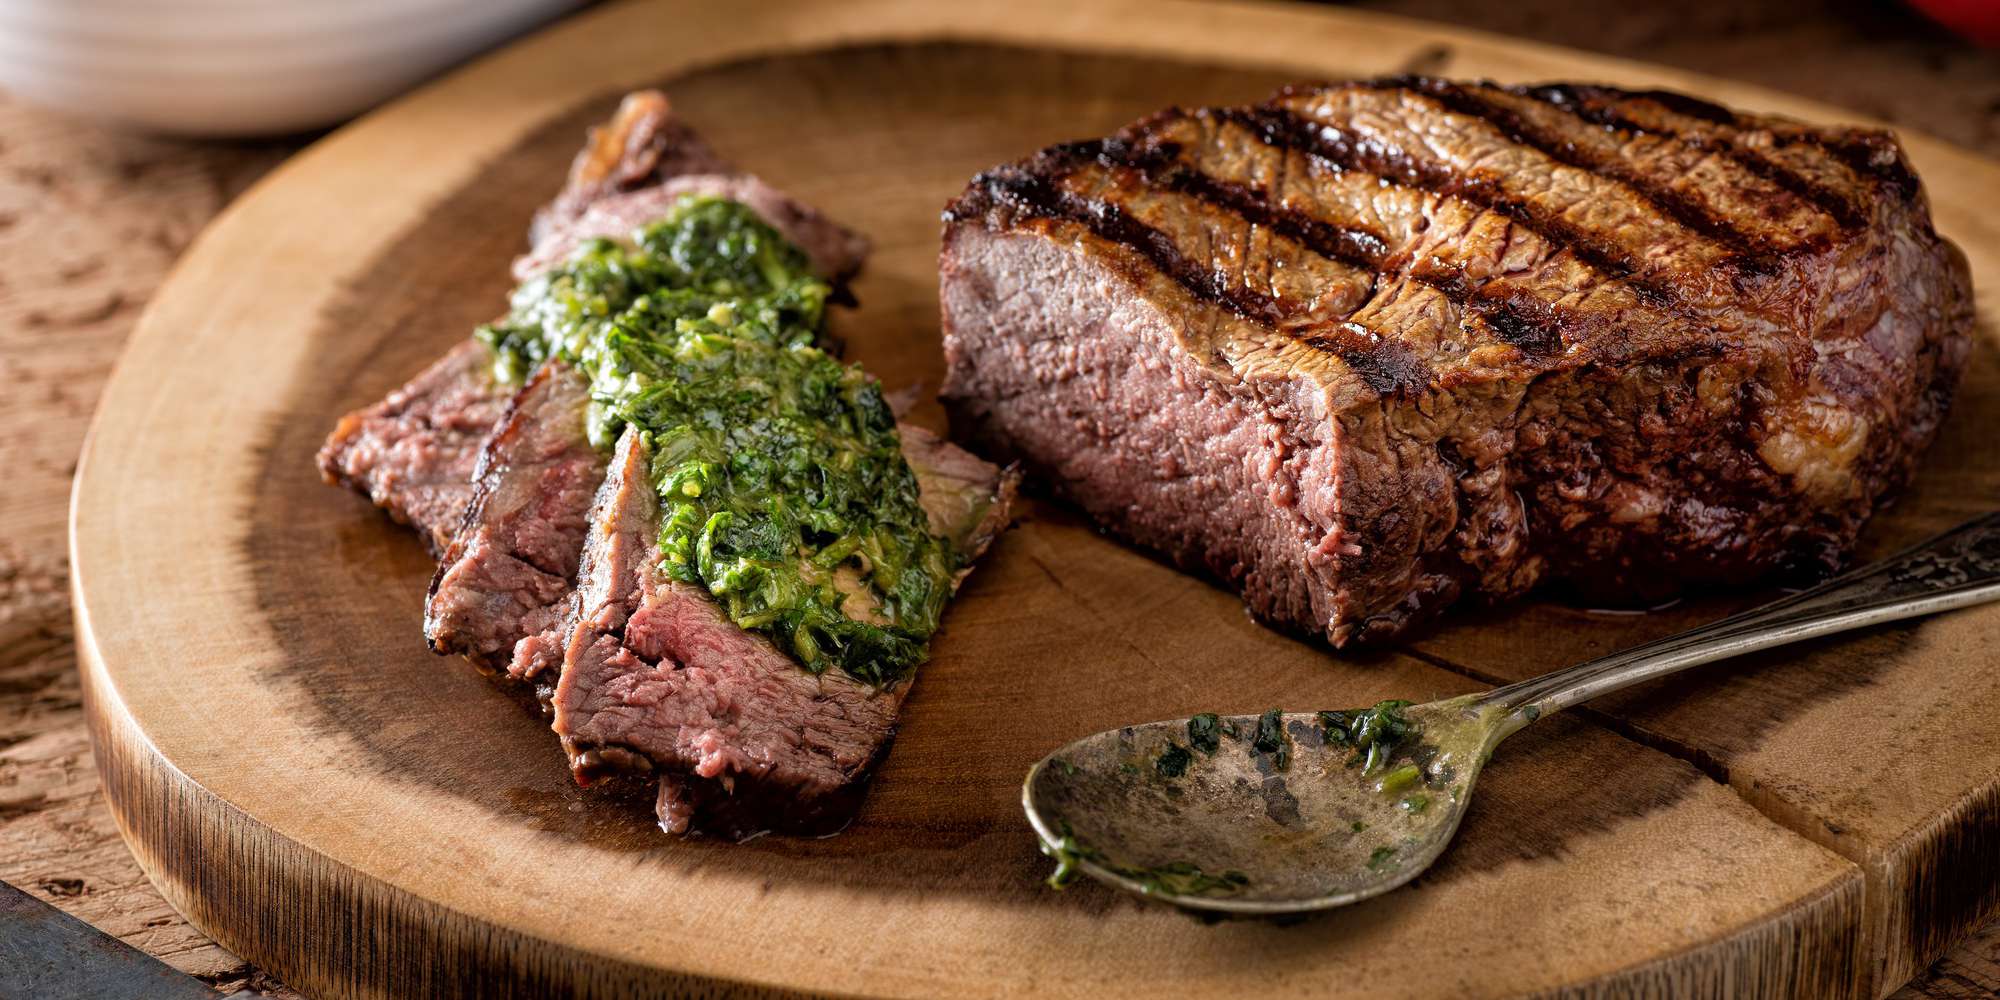 Grilled Flank Steak with Avocado Chimichurri